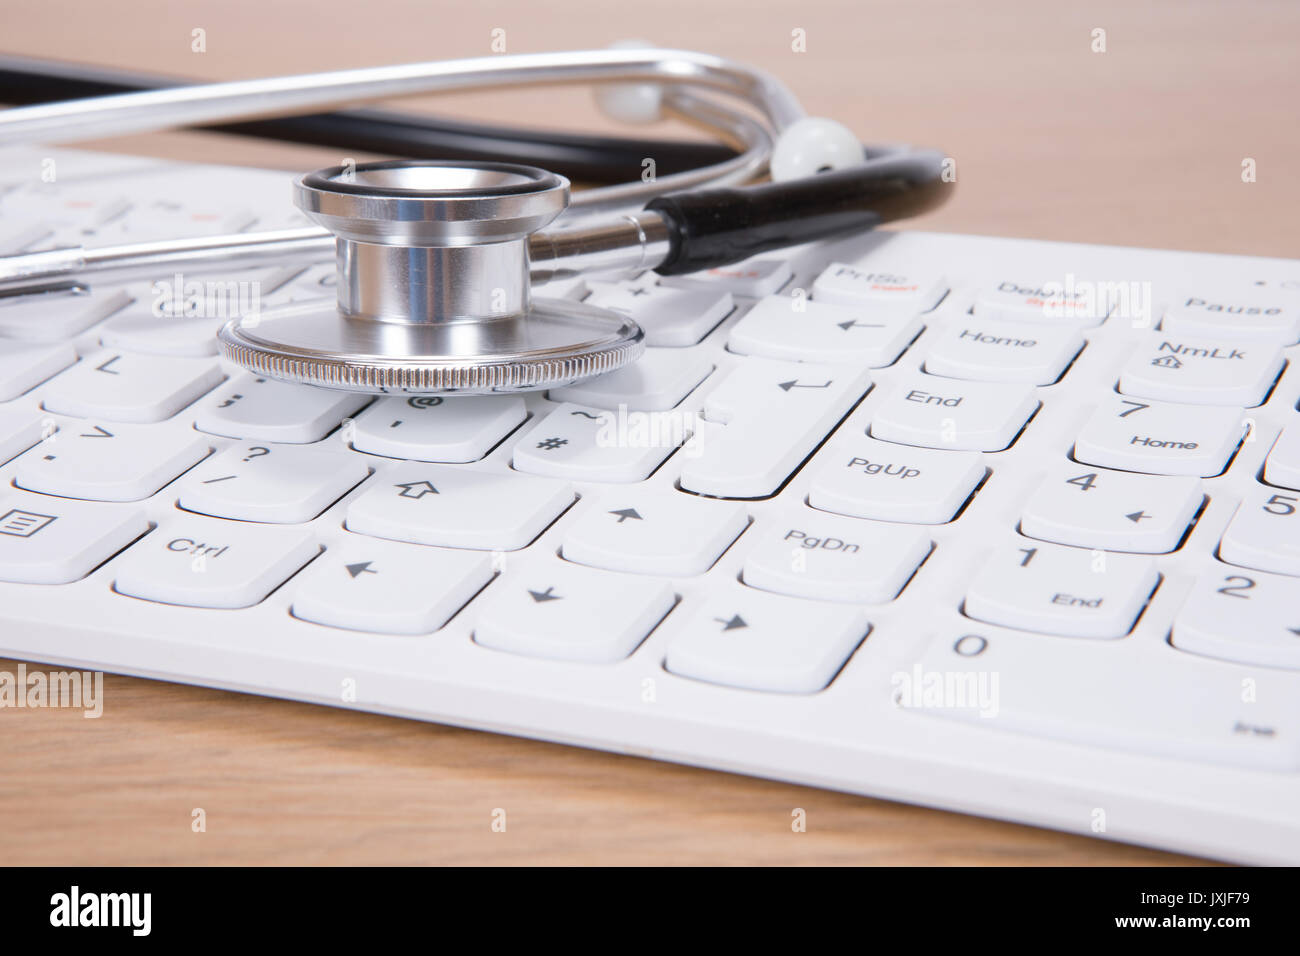 Close-up of acoustic stethoscope lying on computer keyboard Stock Photo